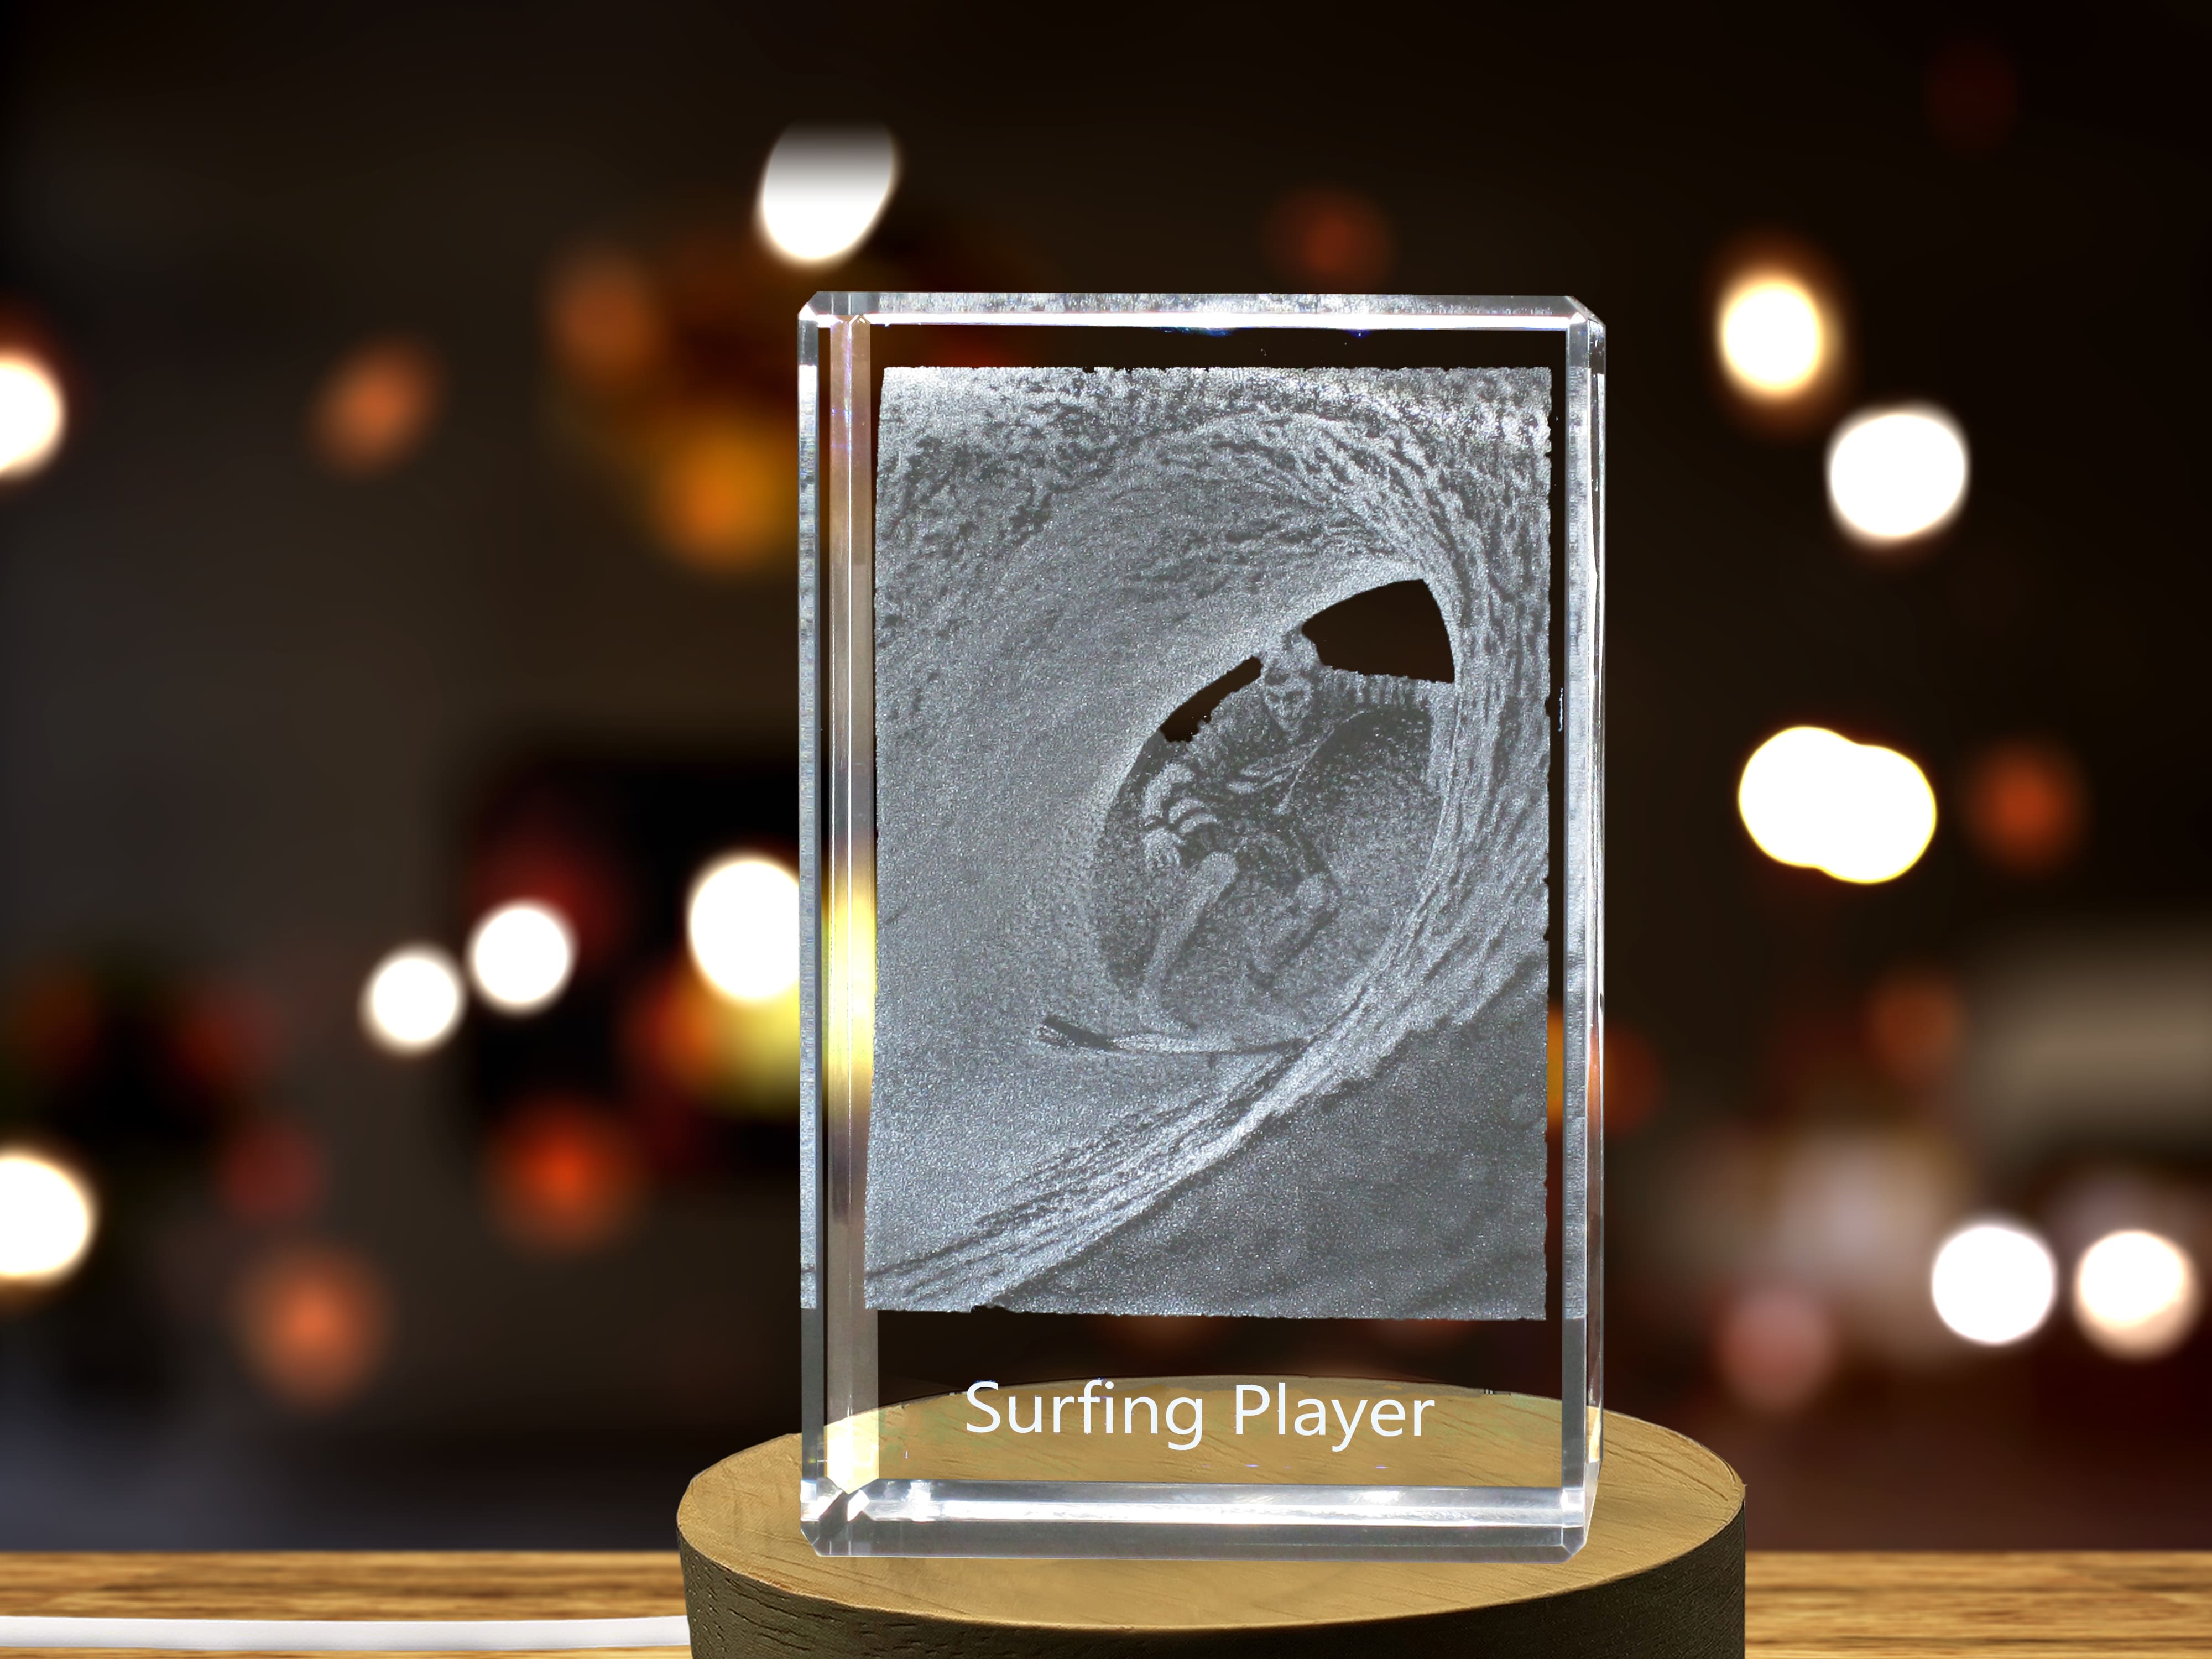 Surfing Player 3D Engraved Crystal 3D Engraved Crystal Keepsake/Gift/Decor/Collectible/Souvenir A&B Crystal Collection